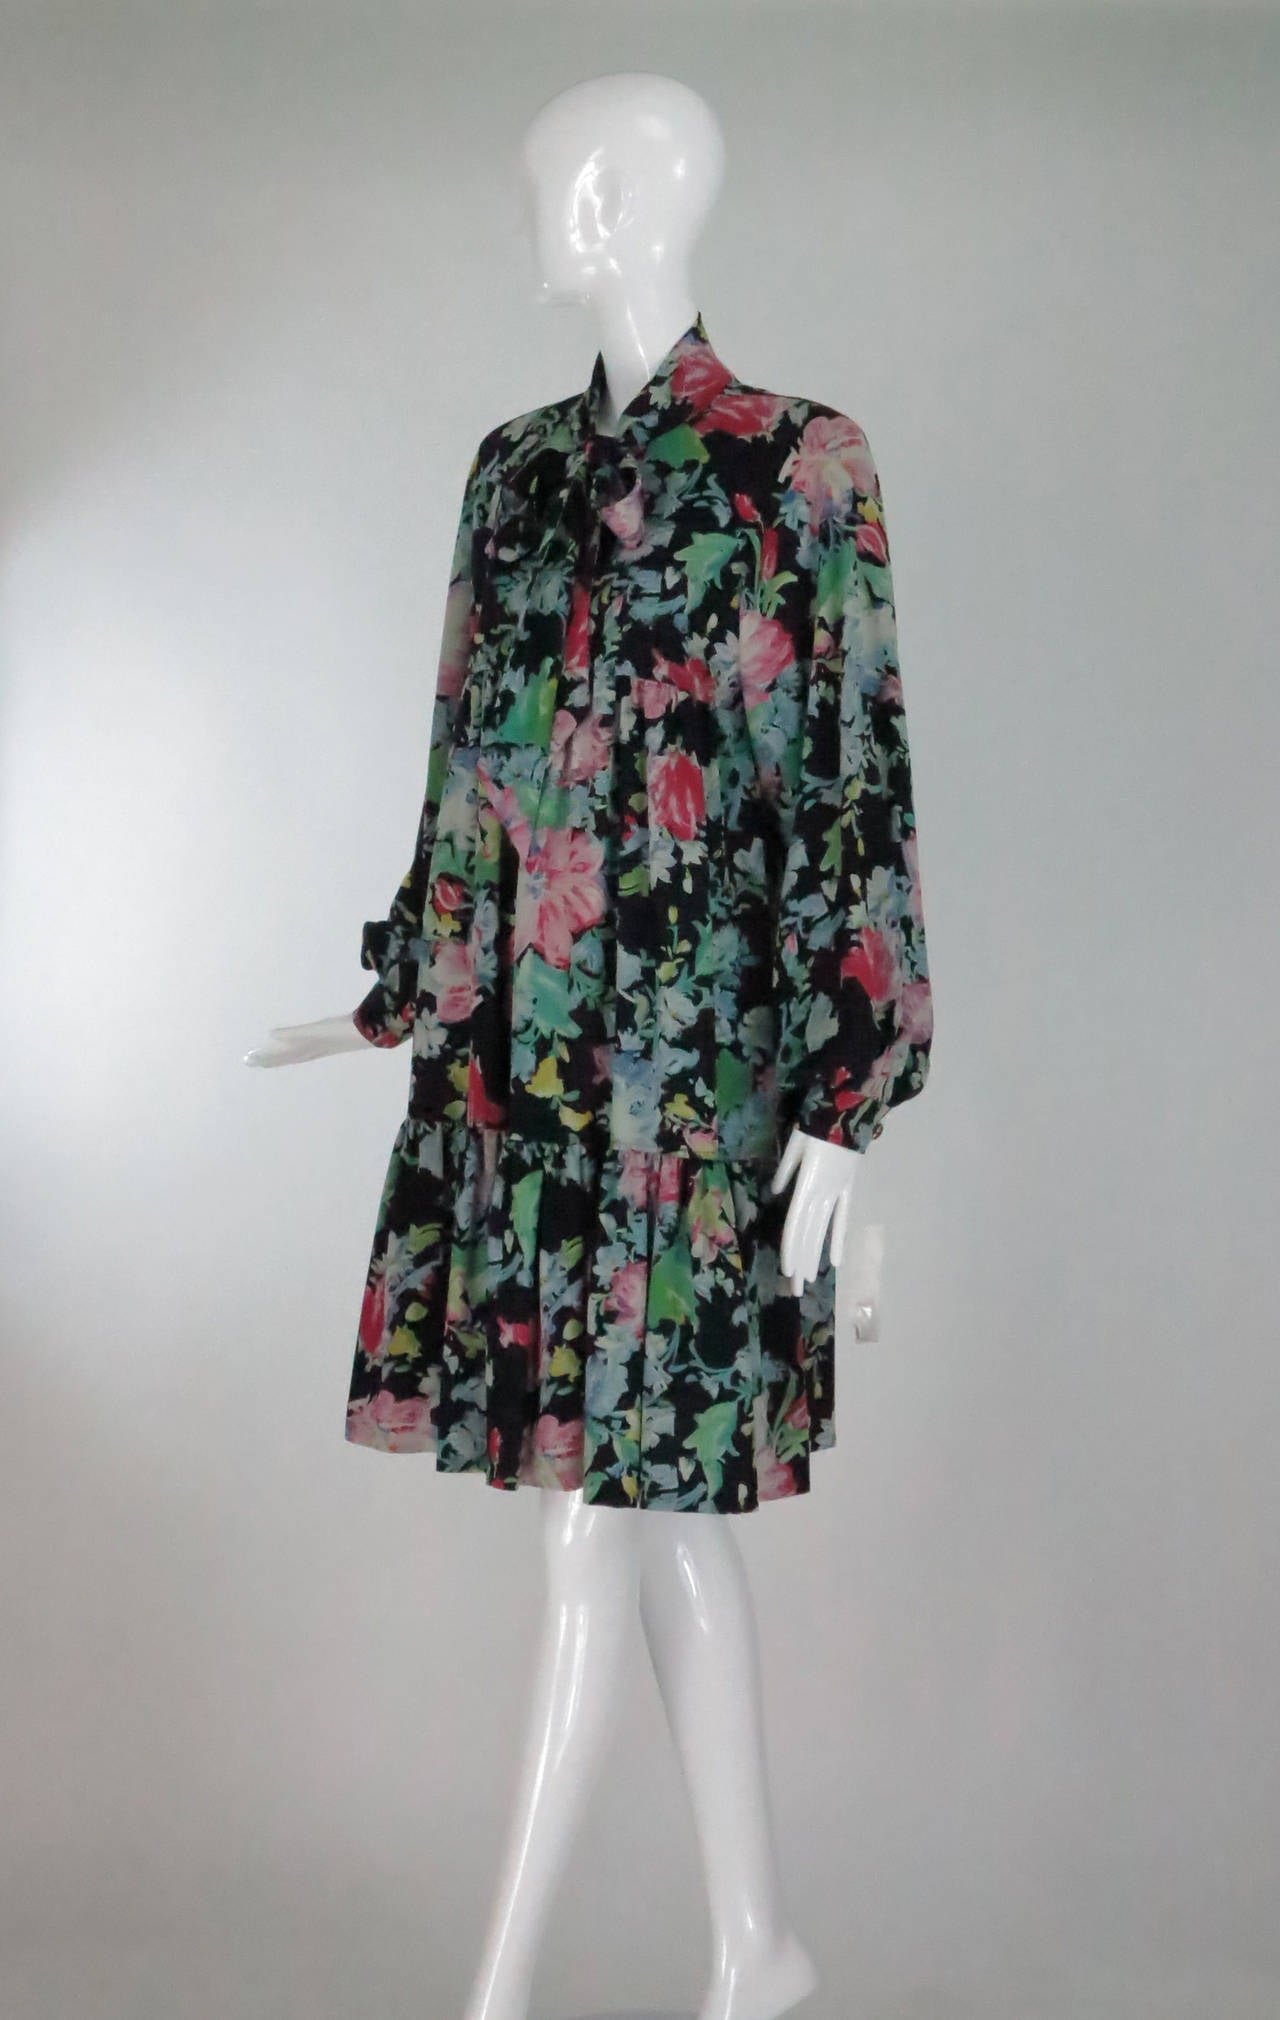 Baby doll style print dress from the late 1970s...Button front empire bodice dress is gathered below the bust and has a deep ruffle hem...Long full raglan sleeves with banded button cuffs...Attached self tie at the neck...Pull on style